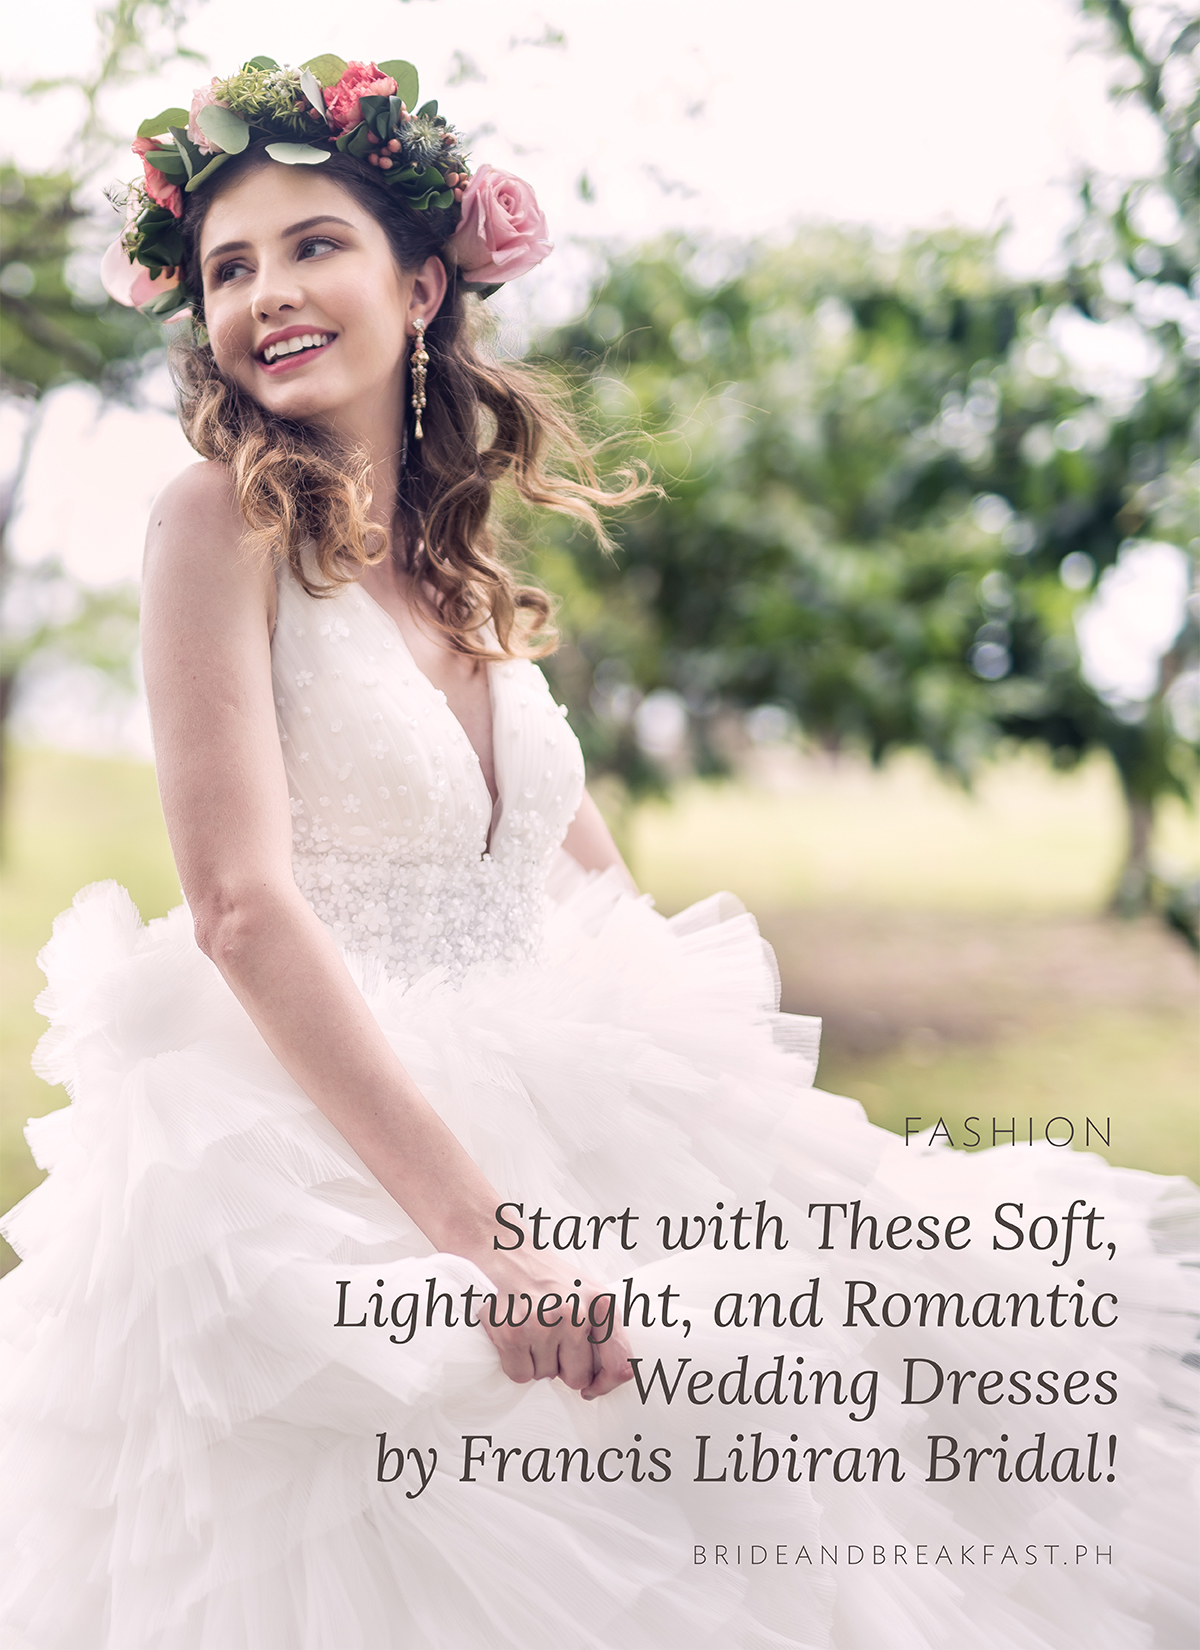 Start with These Soft, Lightweight, and Romantic Wedding Dresses by Francis Libiran Bridal!